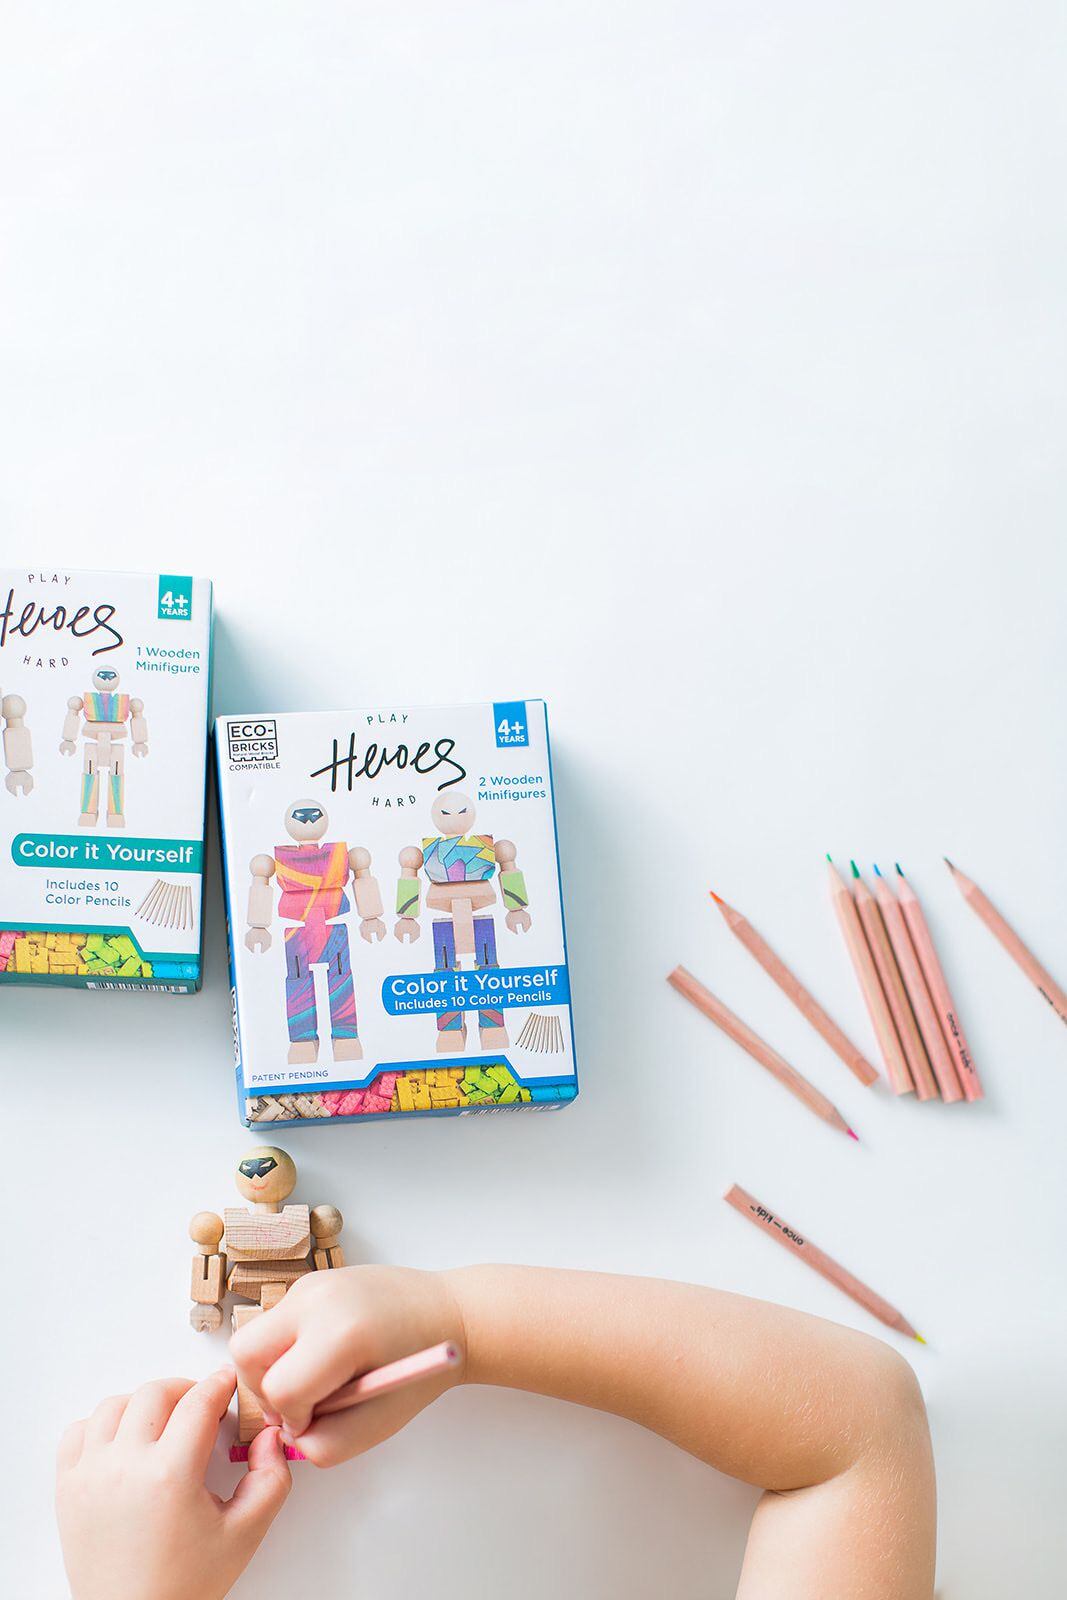 Wooden action figures made by Dallas-based Once Kids can be personalized.